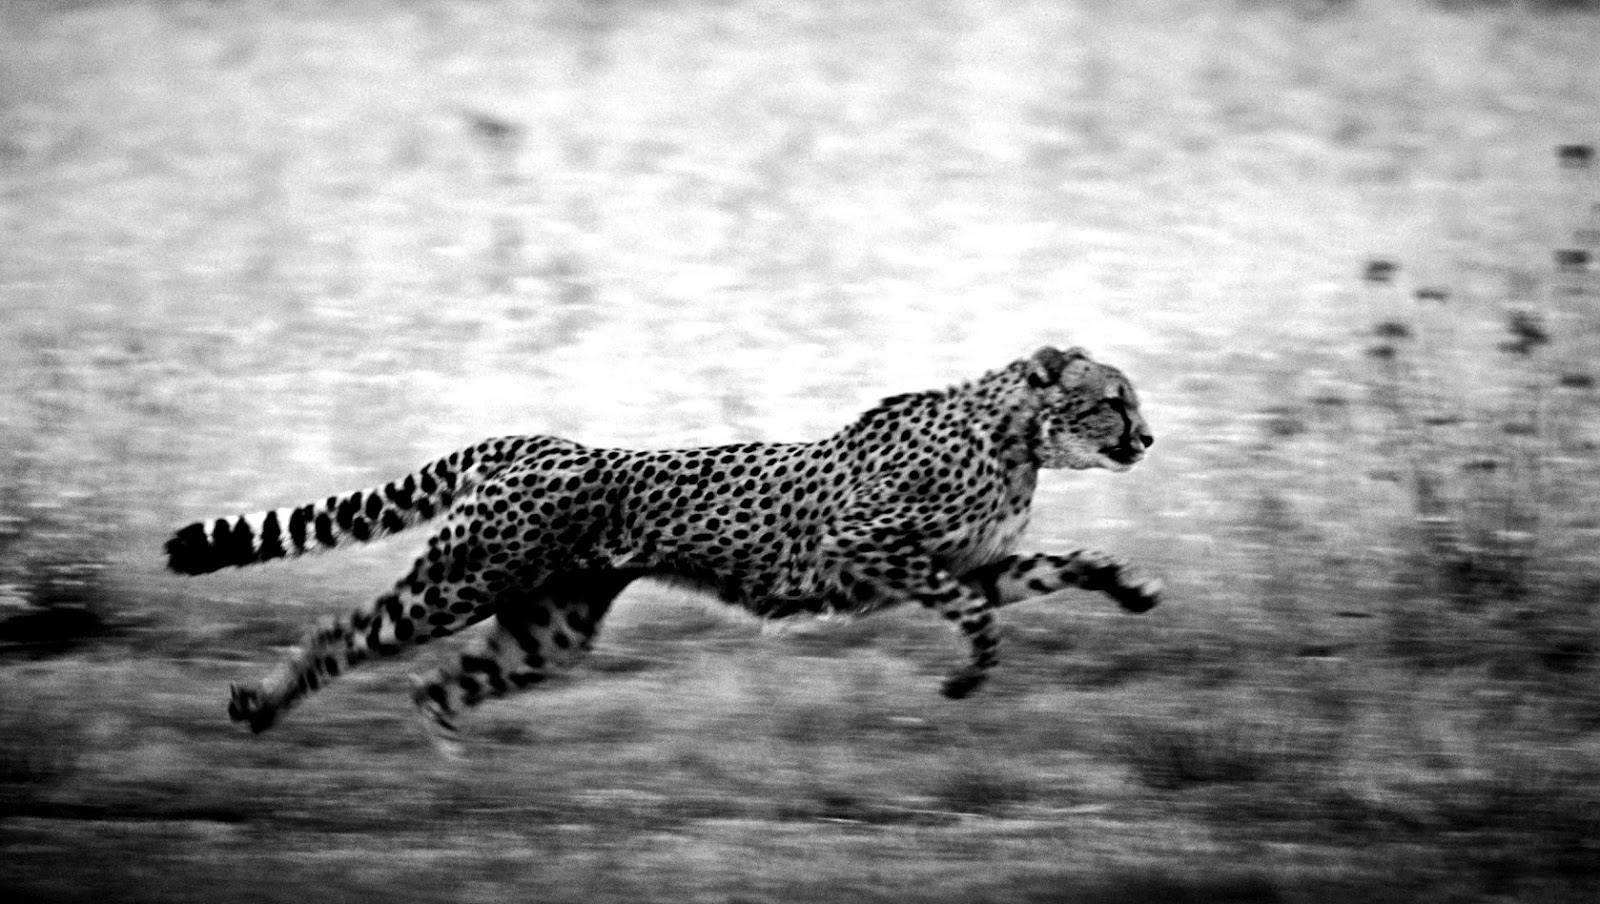 Cheetah Black and white wallpapers Black and White Photography